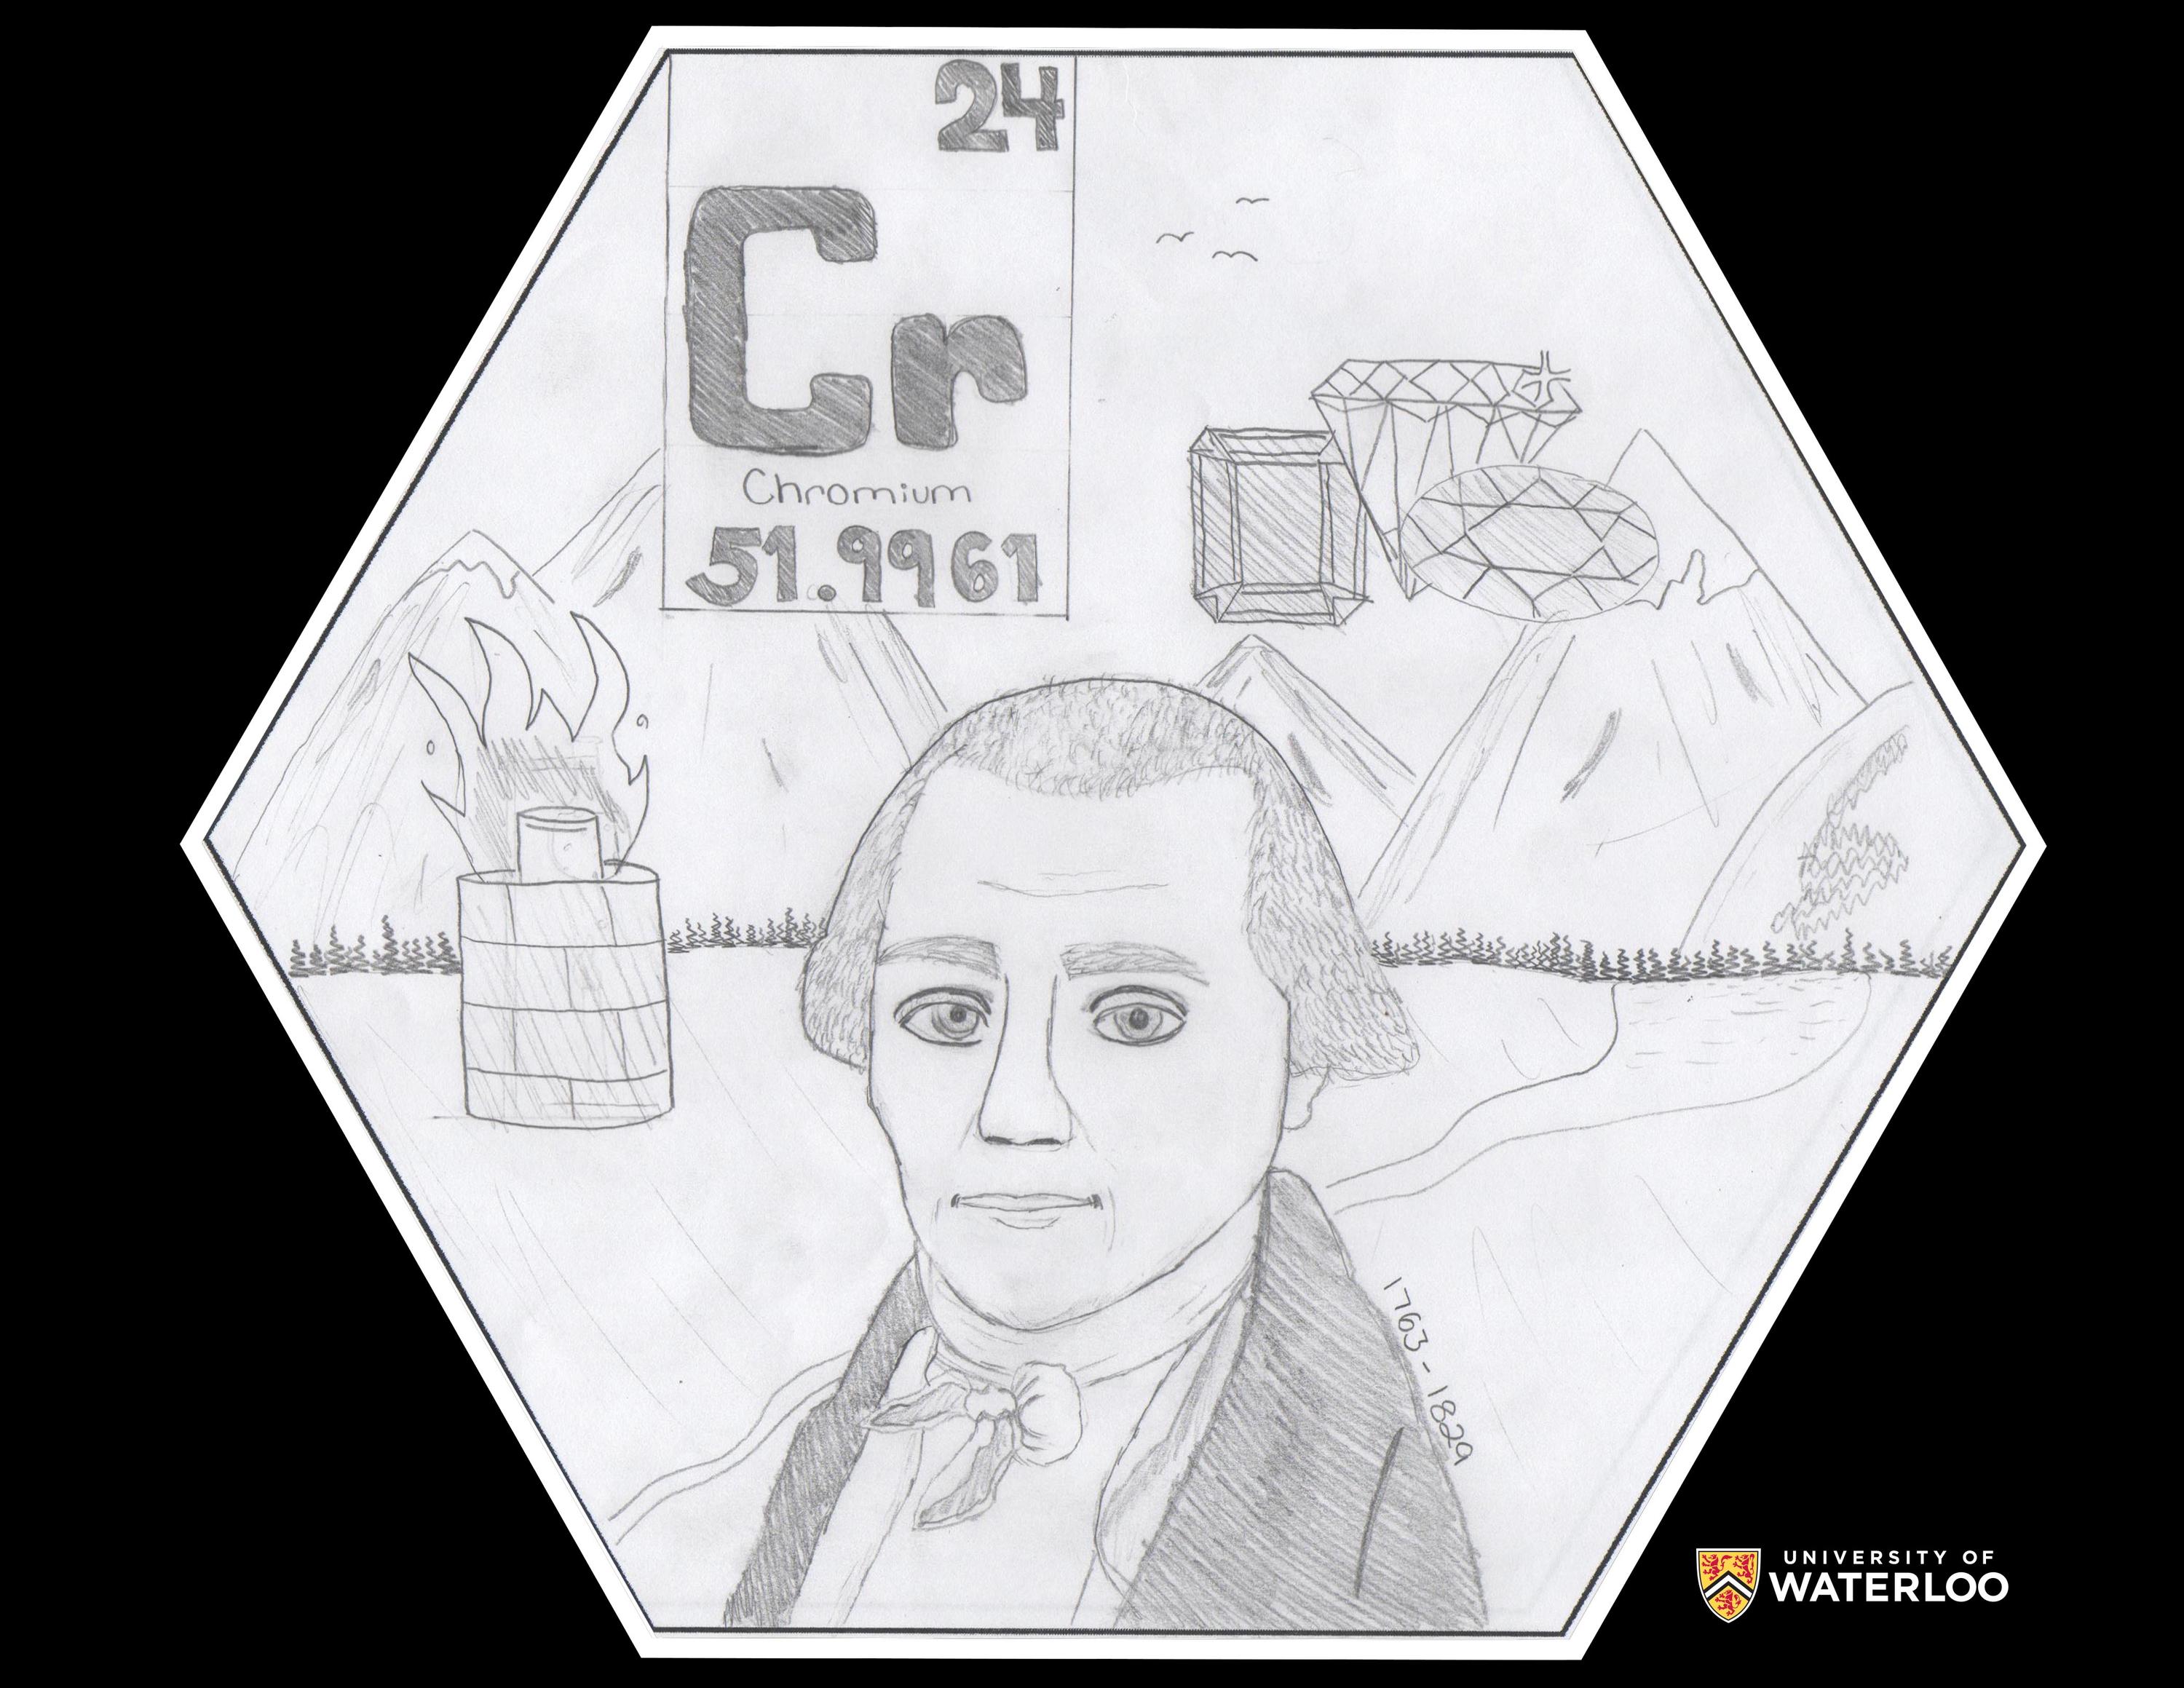 Pencil on paper. A portrait of Louis-Nicolas Vauquelin centre with the periodic table tile above, containing chemical symbol “Cr”, “chromium”, atomic number “24” and atomic weight “51.9961”. The background features a mountain landscape, rubies, and a charcoal furnace.